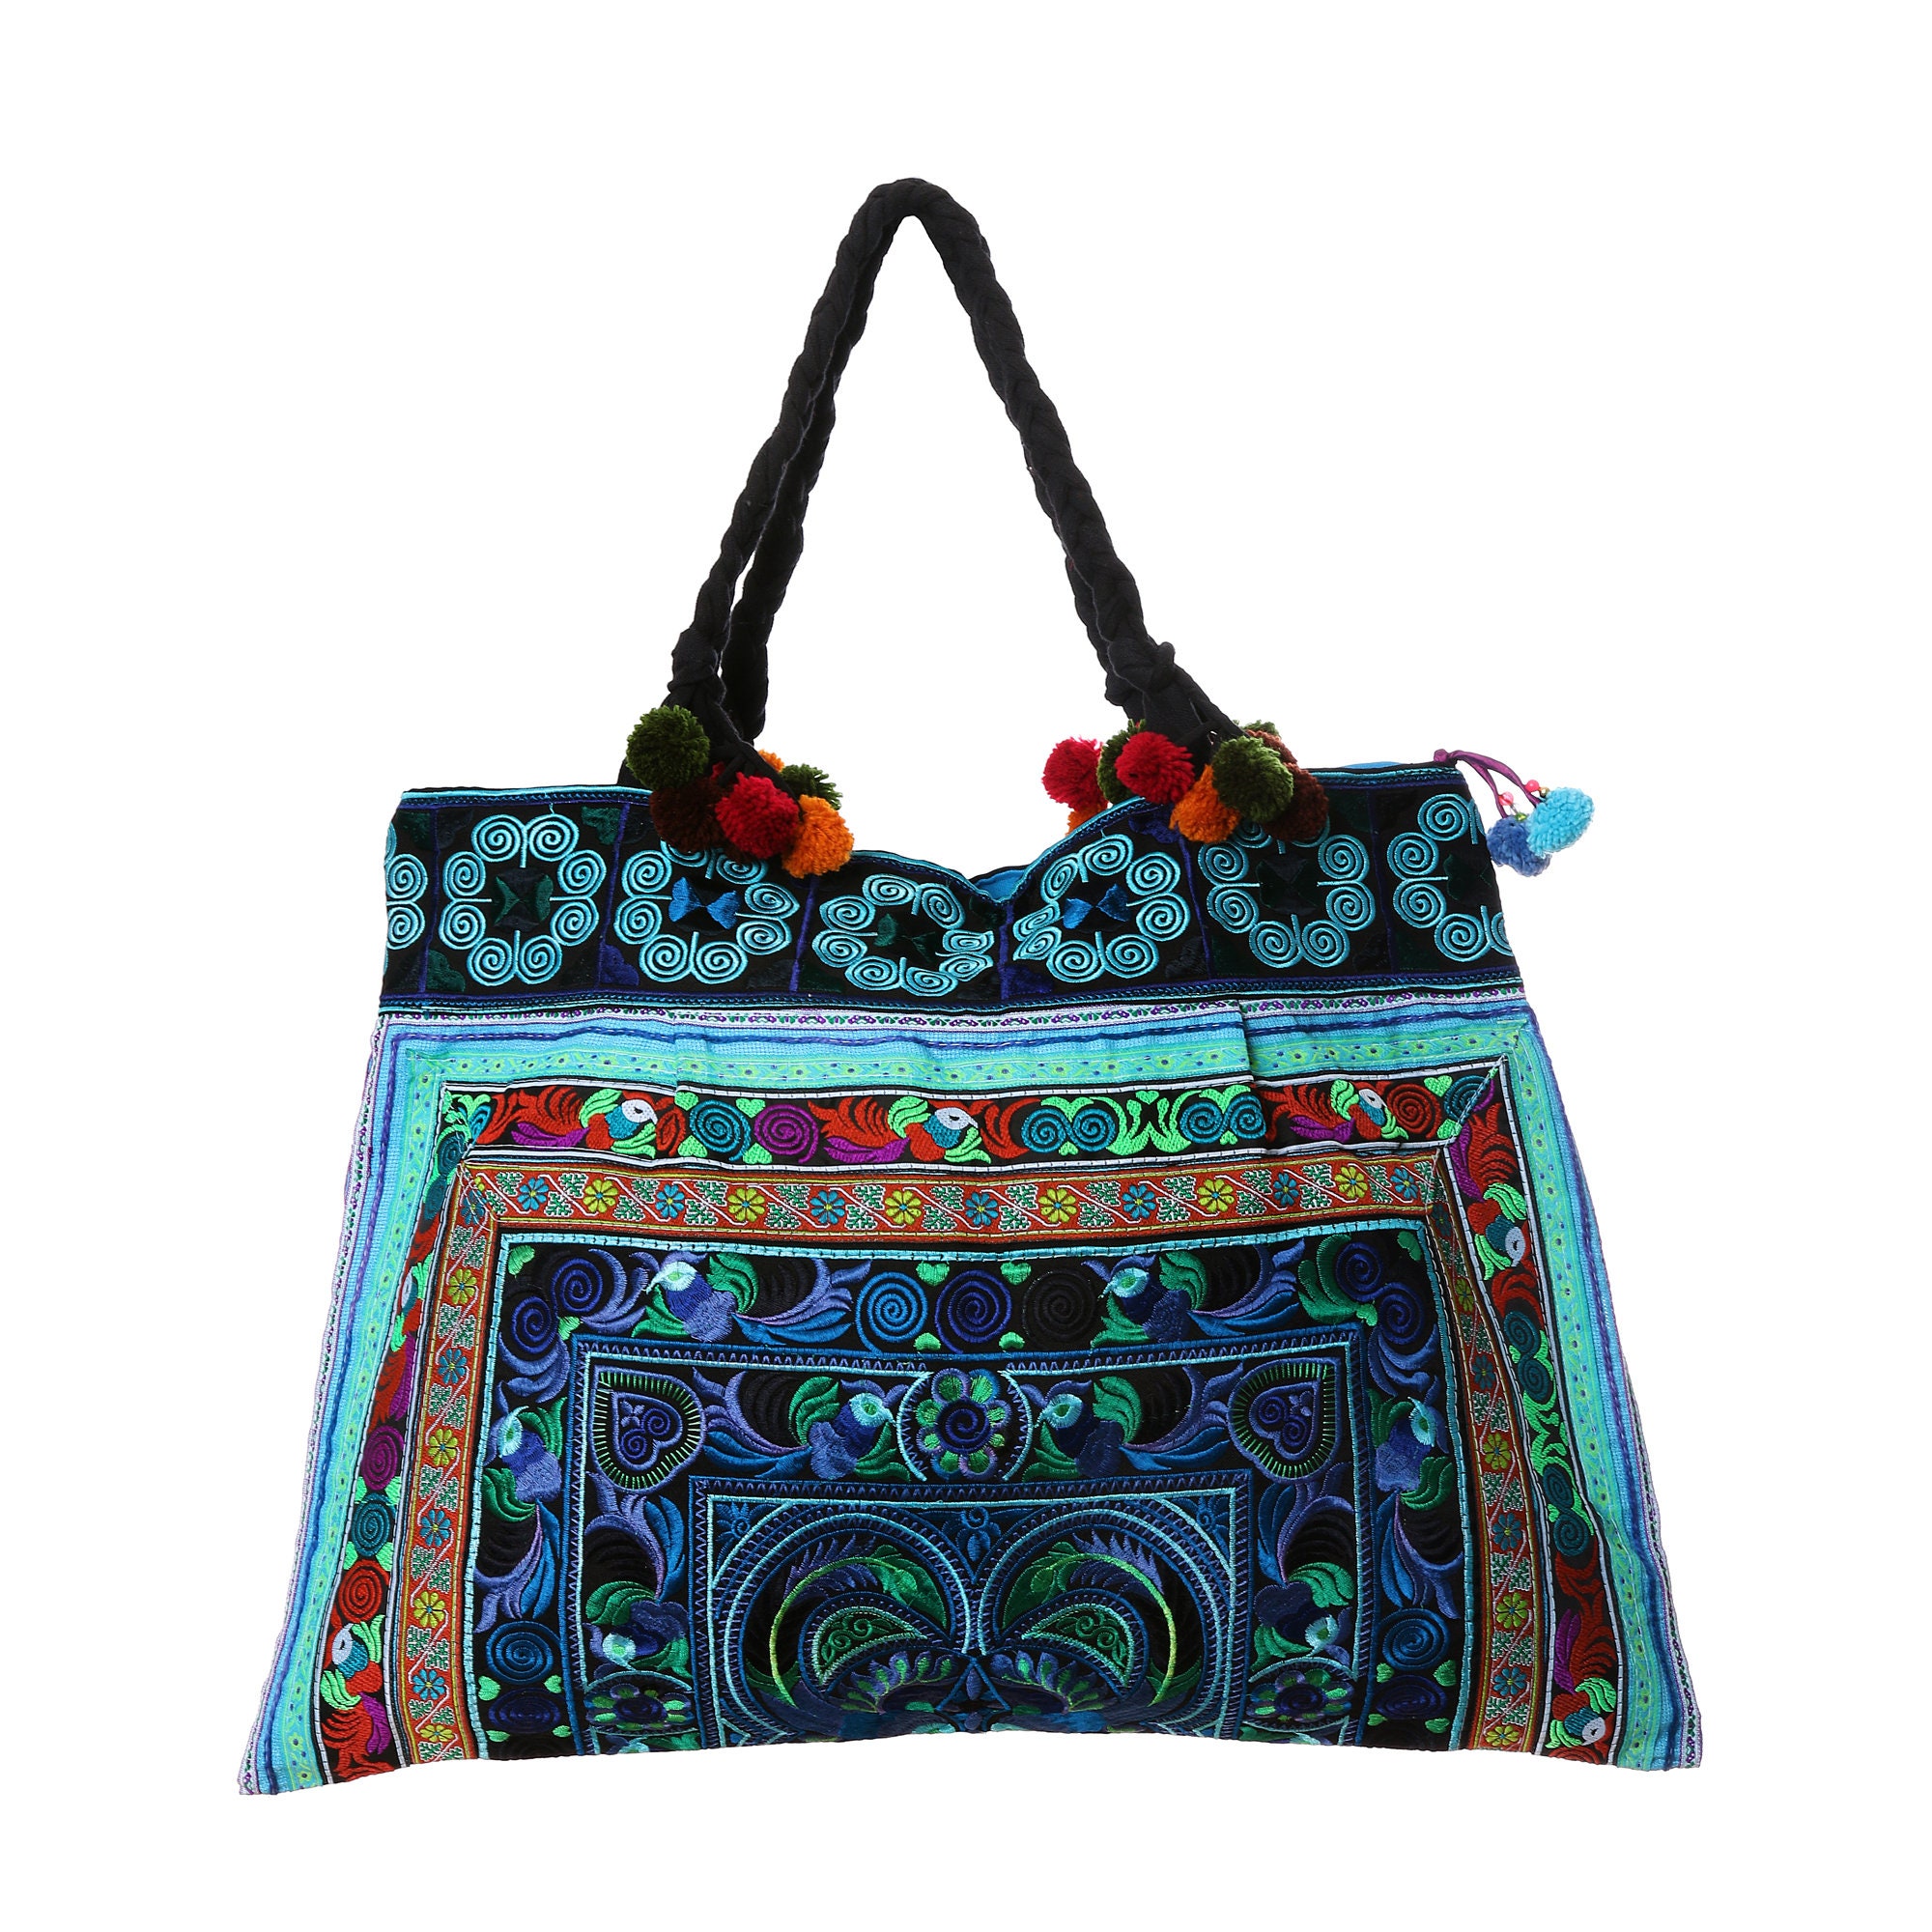 Blue Bird Pattern Hmong Tribe Embroidered Tote Bag Large Size - Etsy